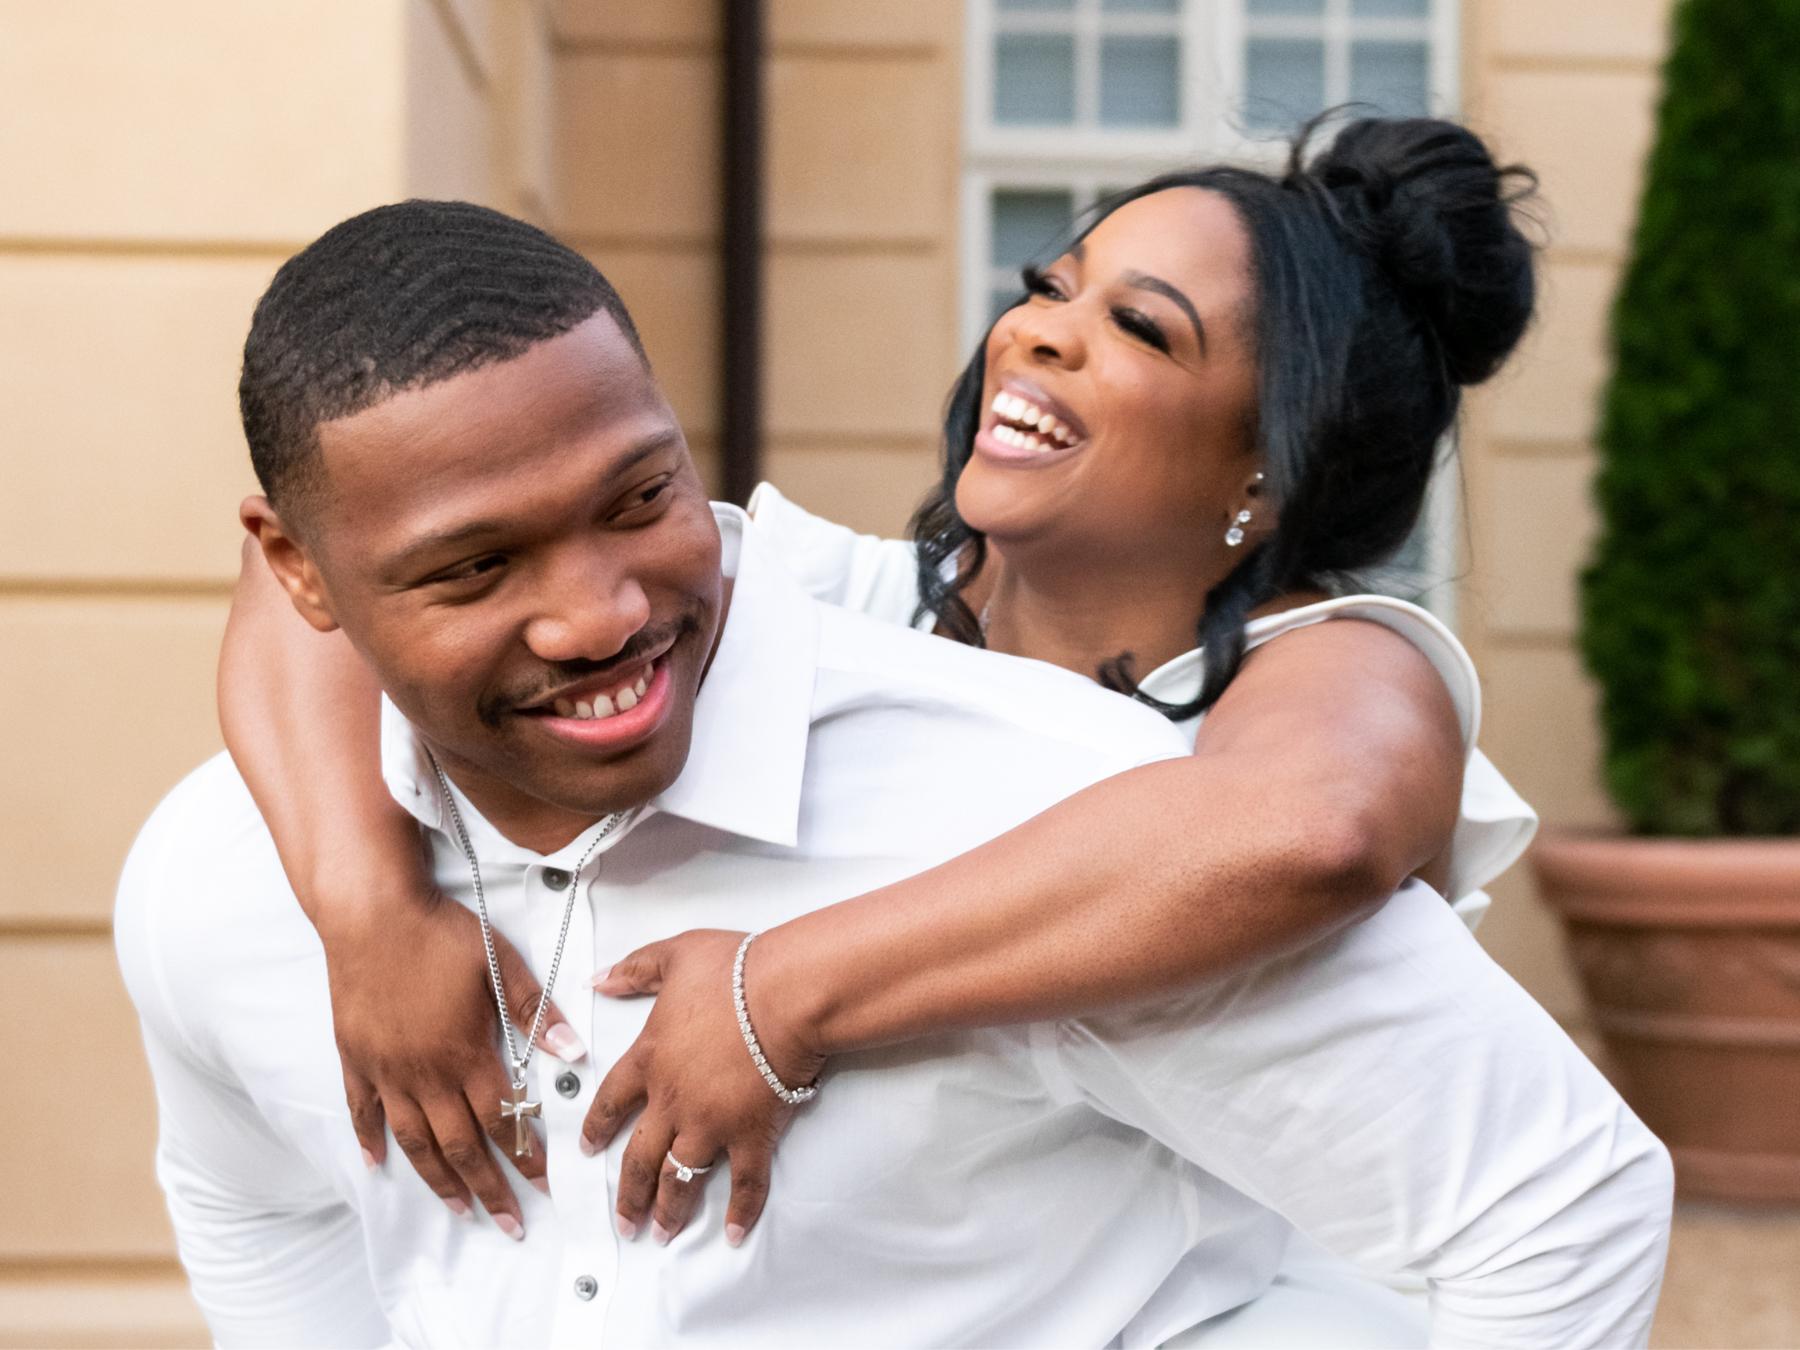 The Wedding Website of Candace Hamilton and Trey Sanders